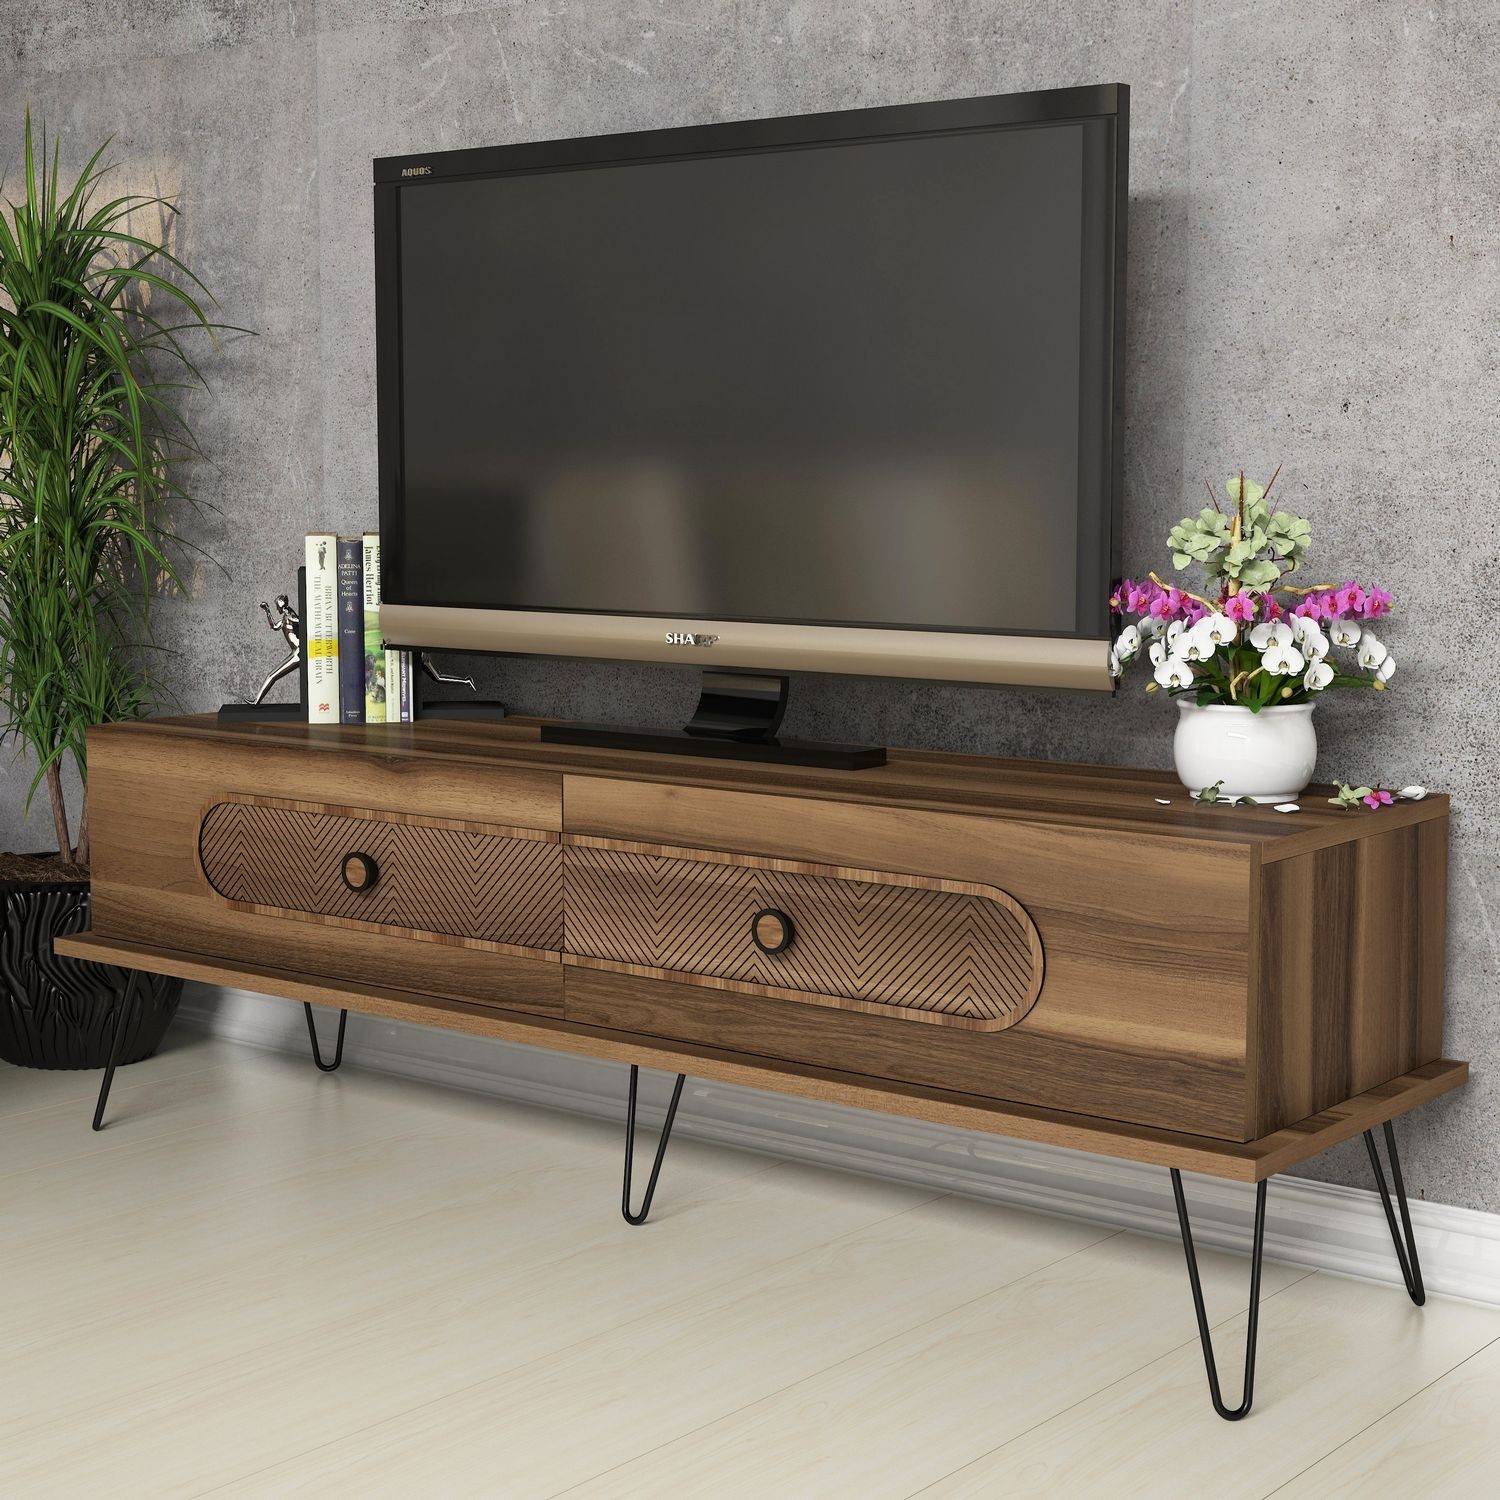 Mueble TV Dover L145cm Madera oscura